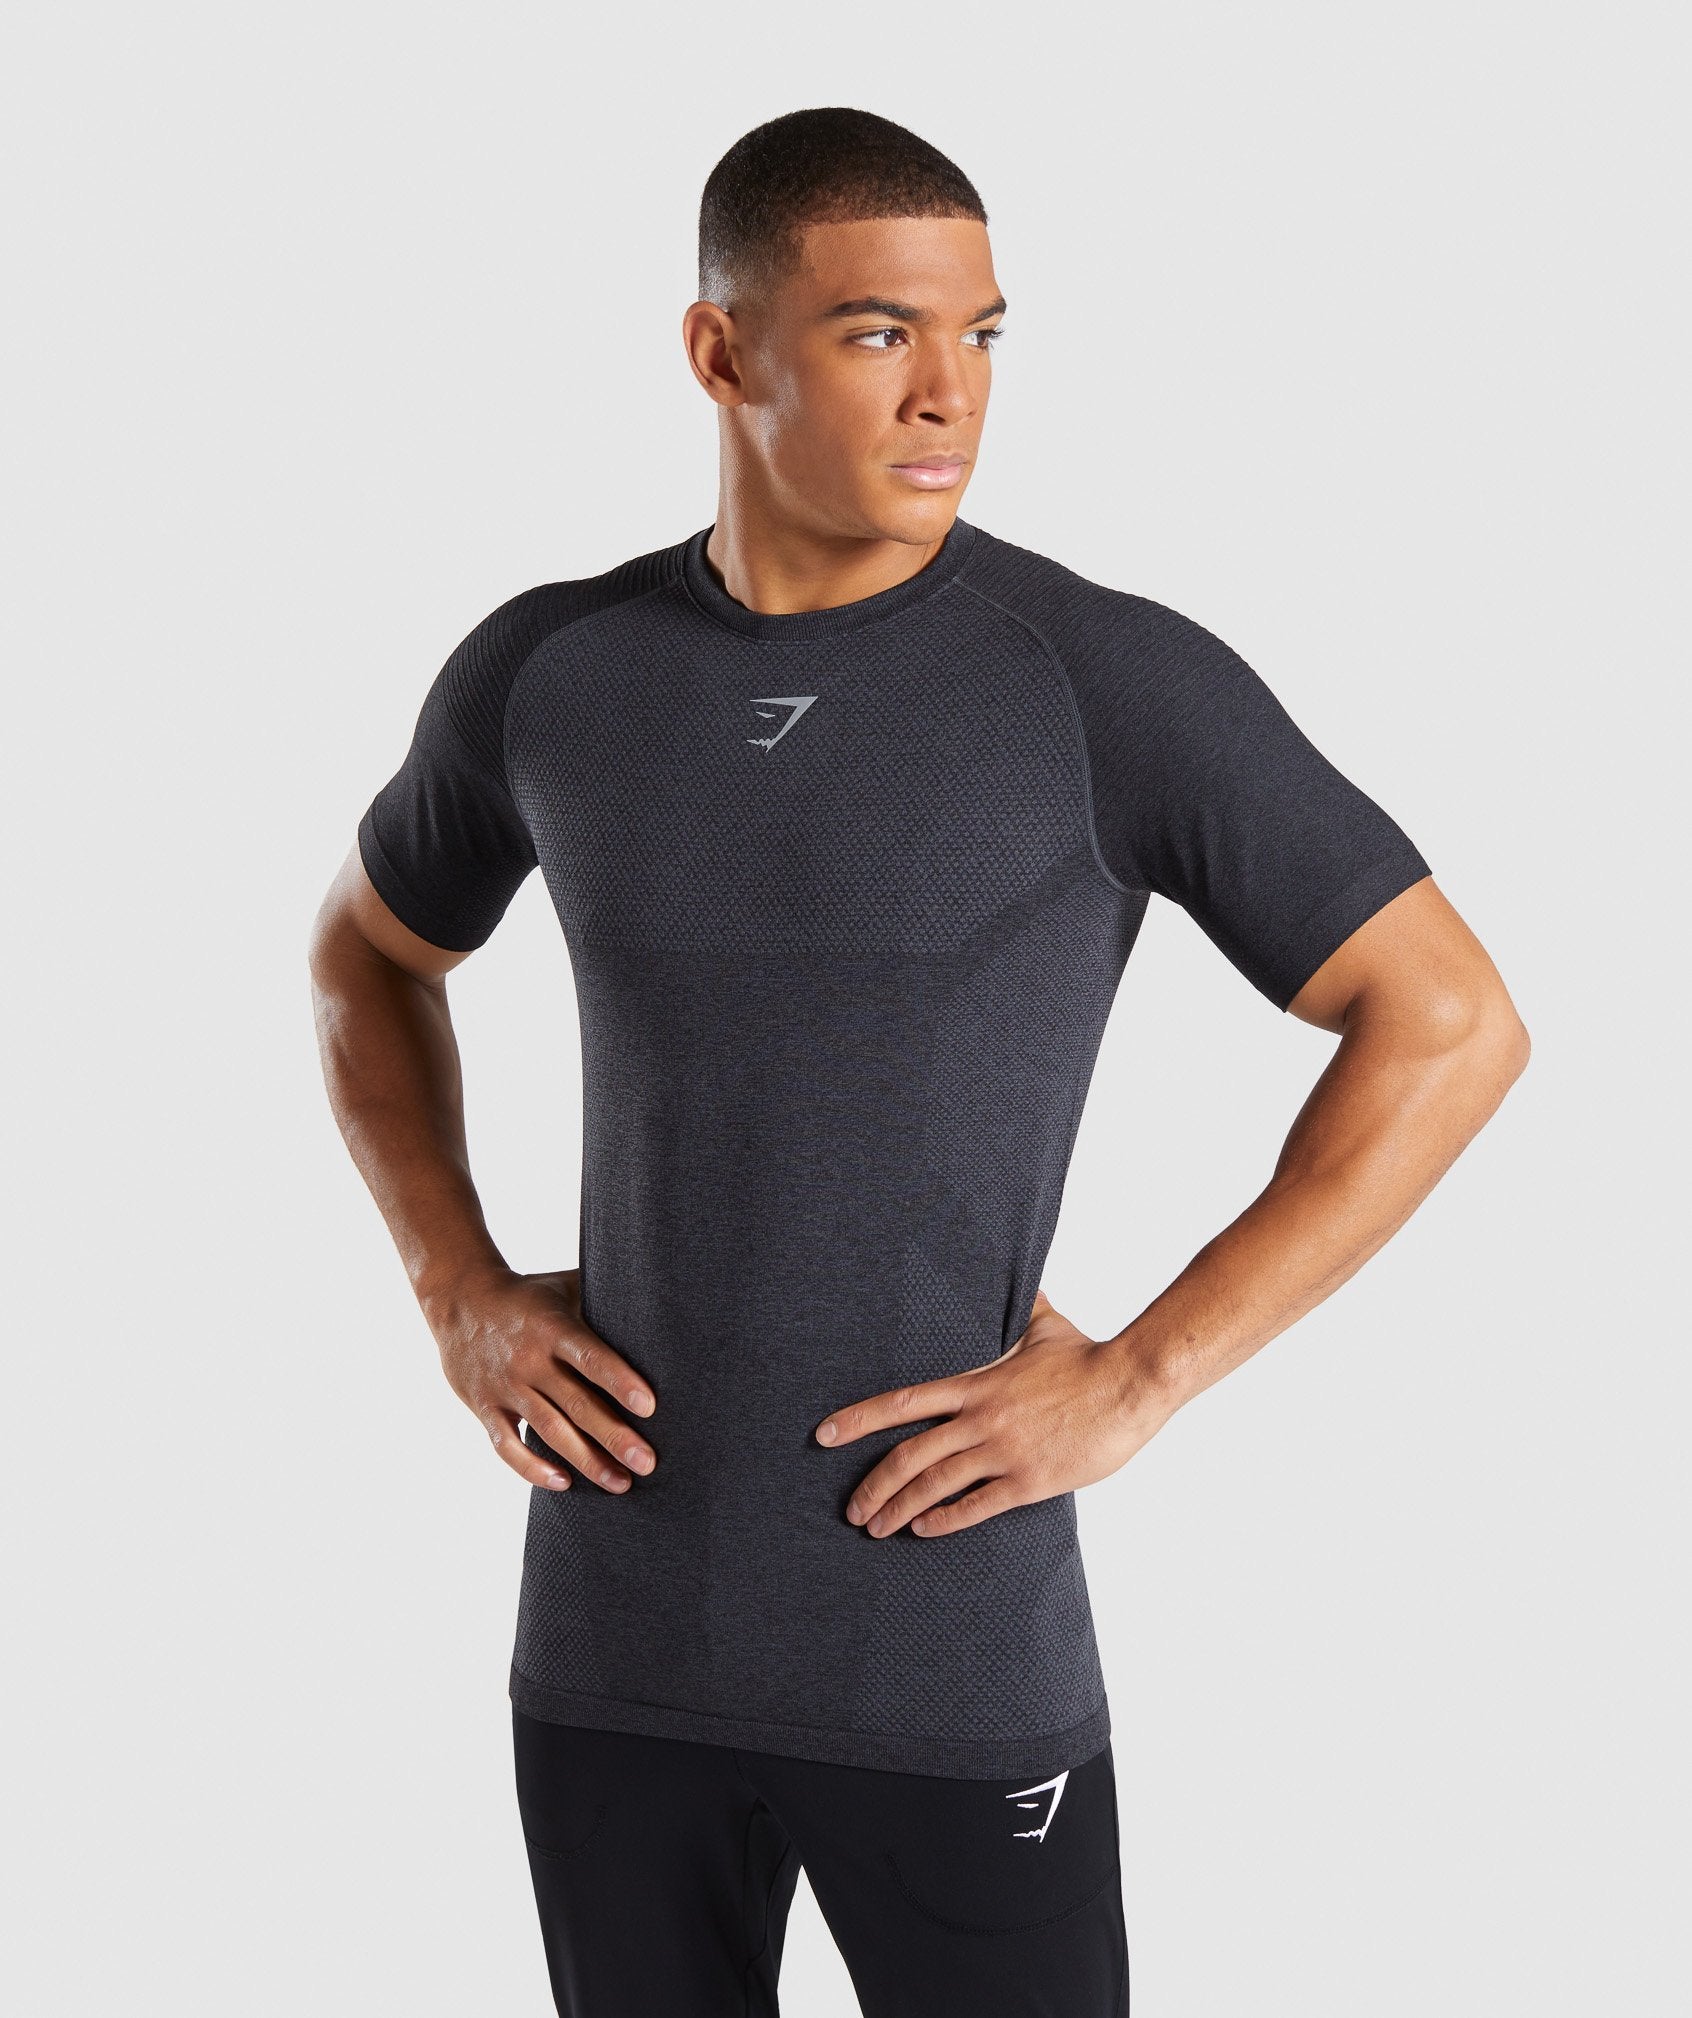 Premium Seamless T-Shirt in Charcoal Marl - view 1